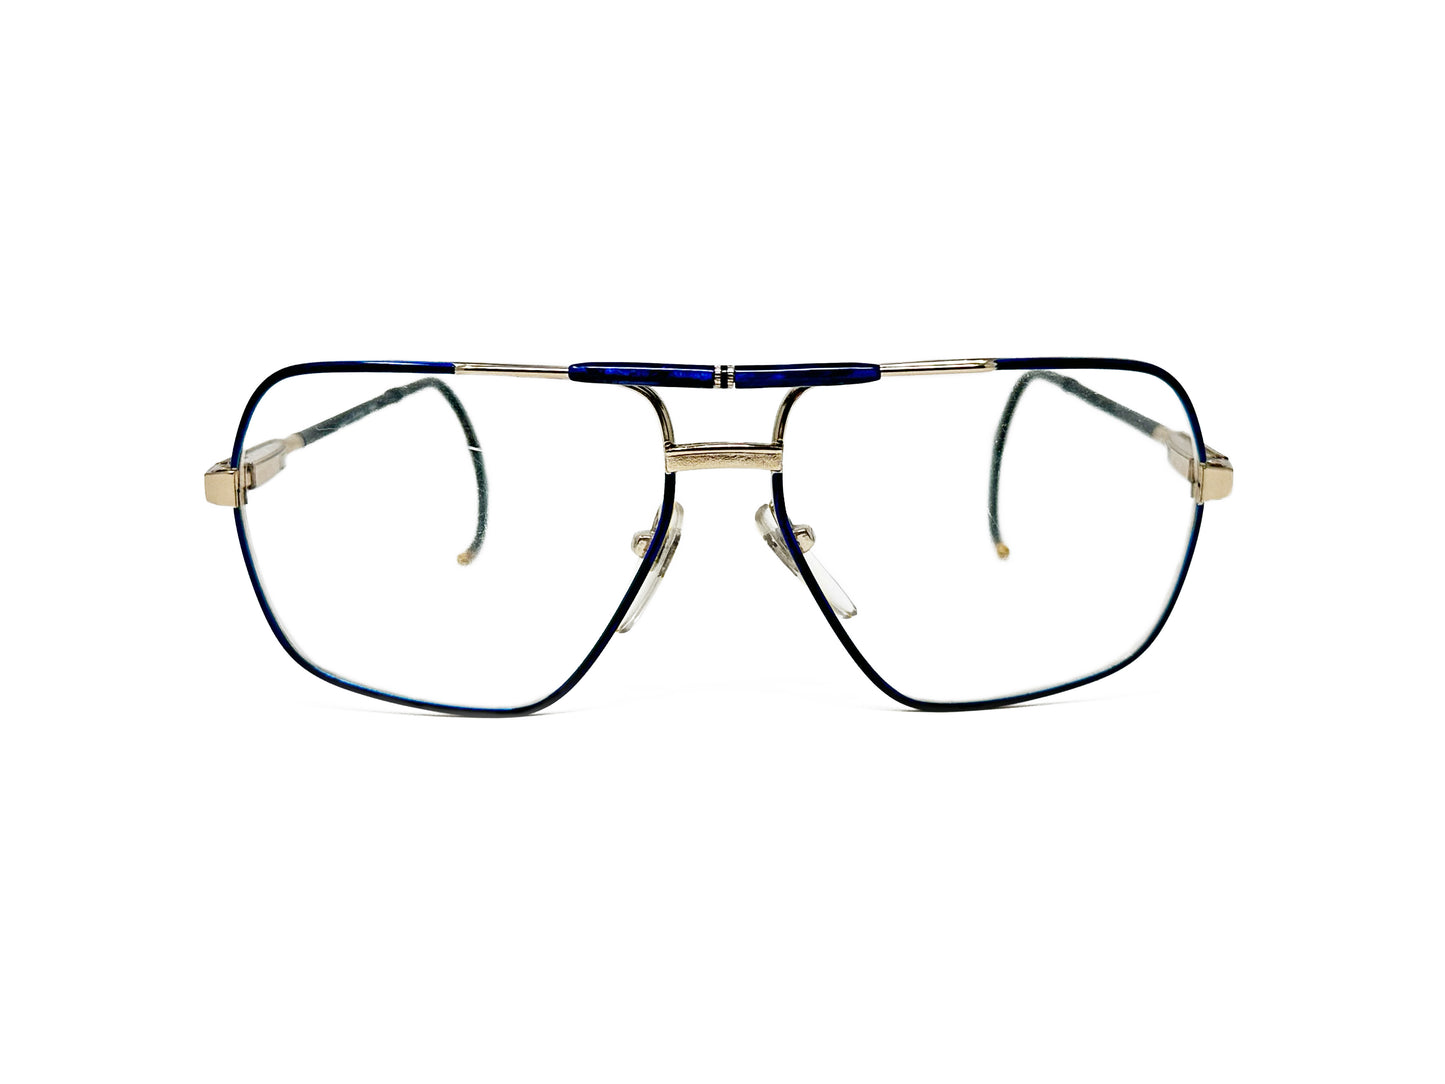 Zollitsch curved aviator-style optical frame. Model: 526. Color: 2 - Navy blue and gold accents and cable temples. Front view.